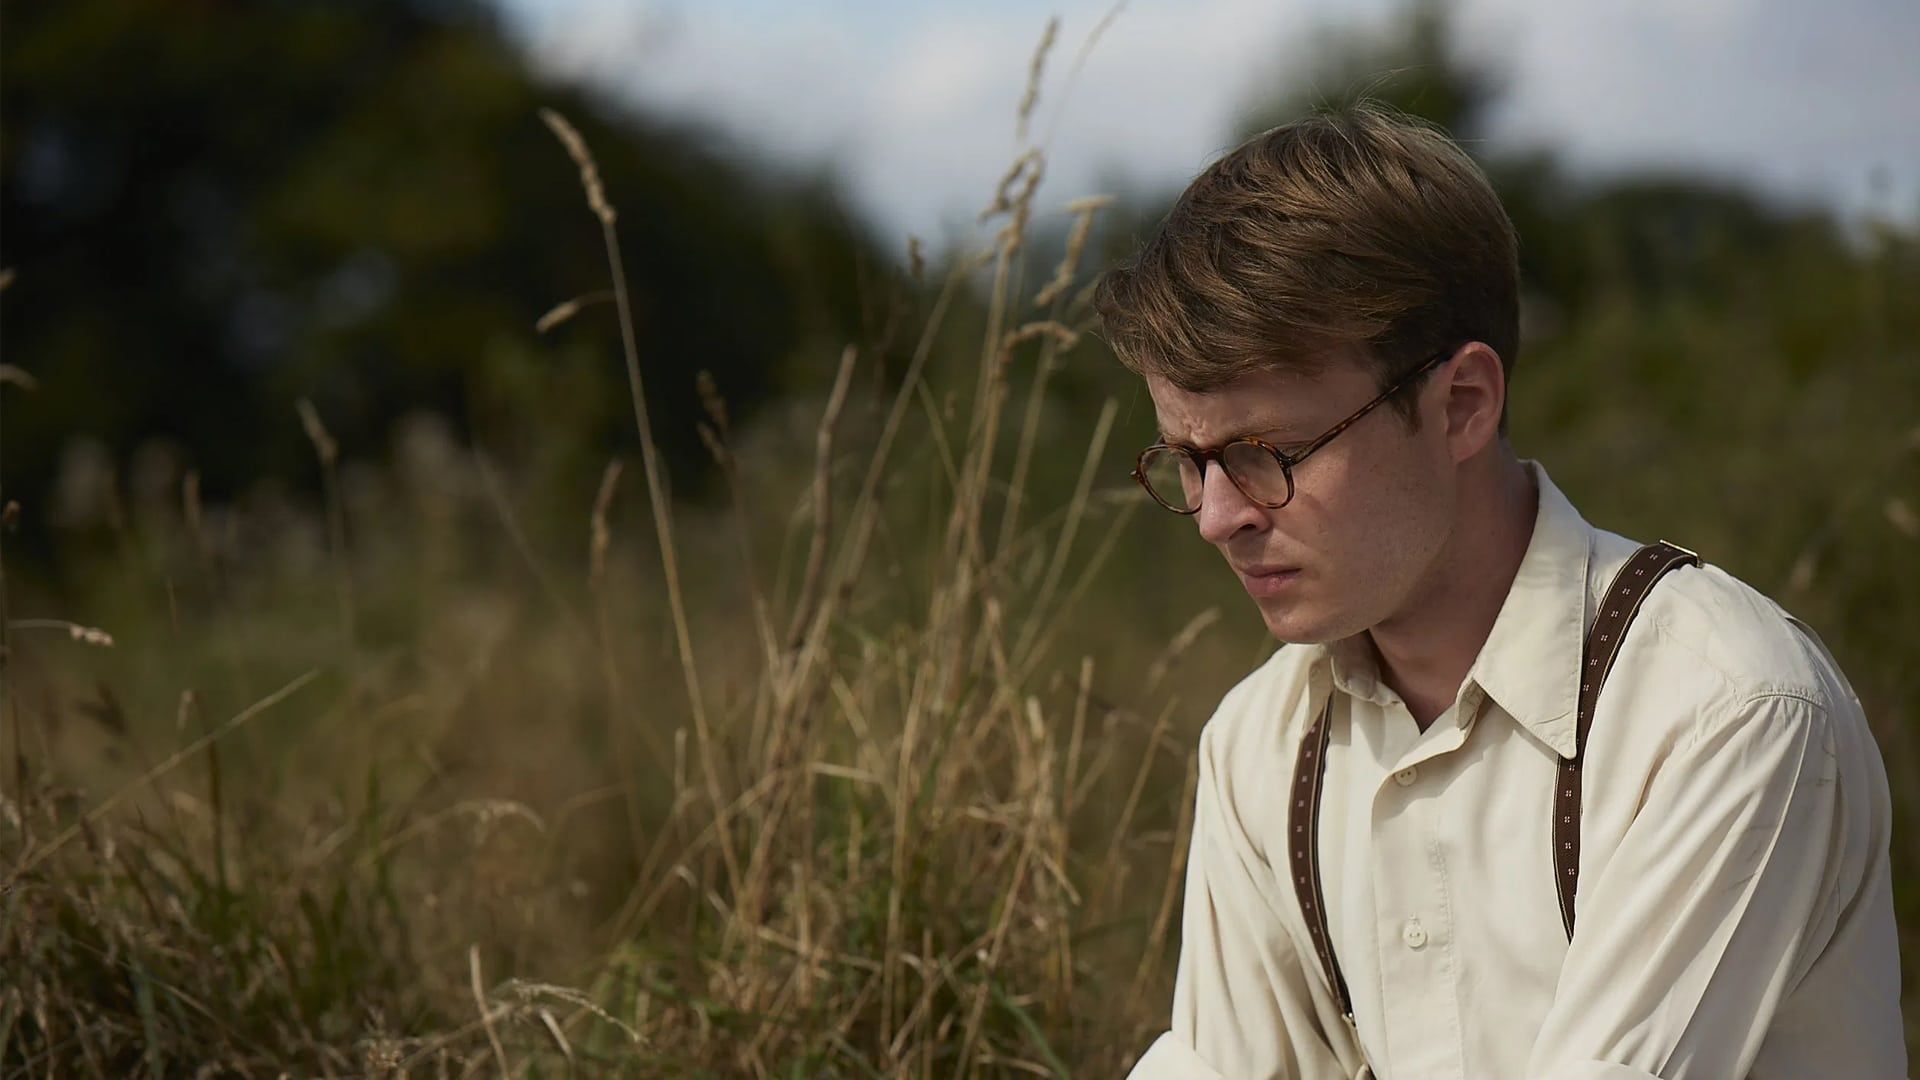 Making Noise Quietly background